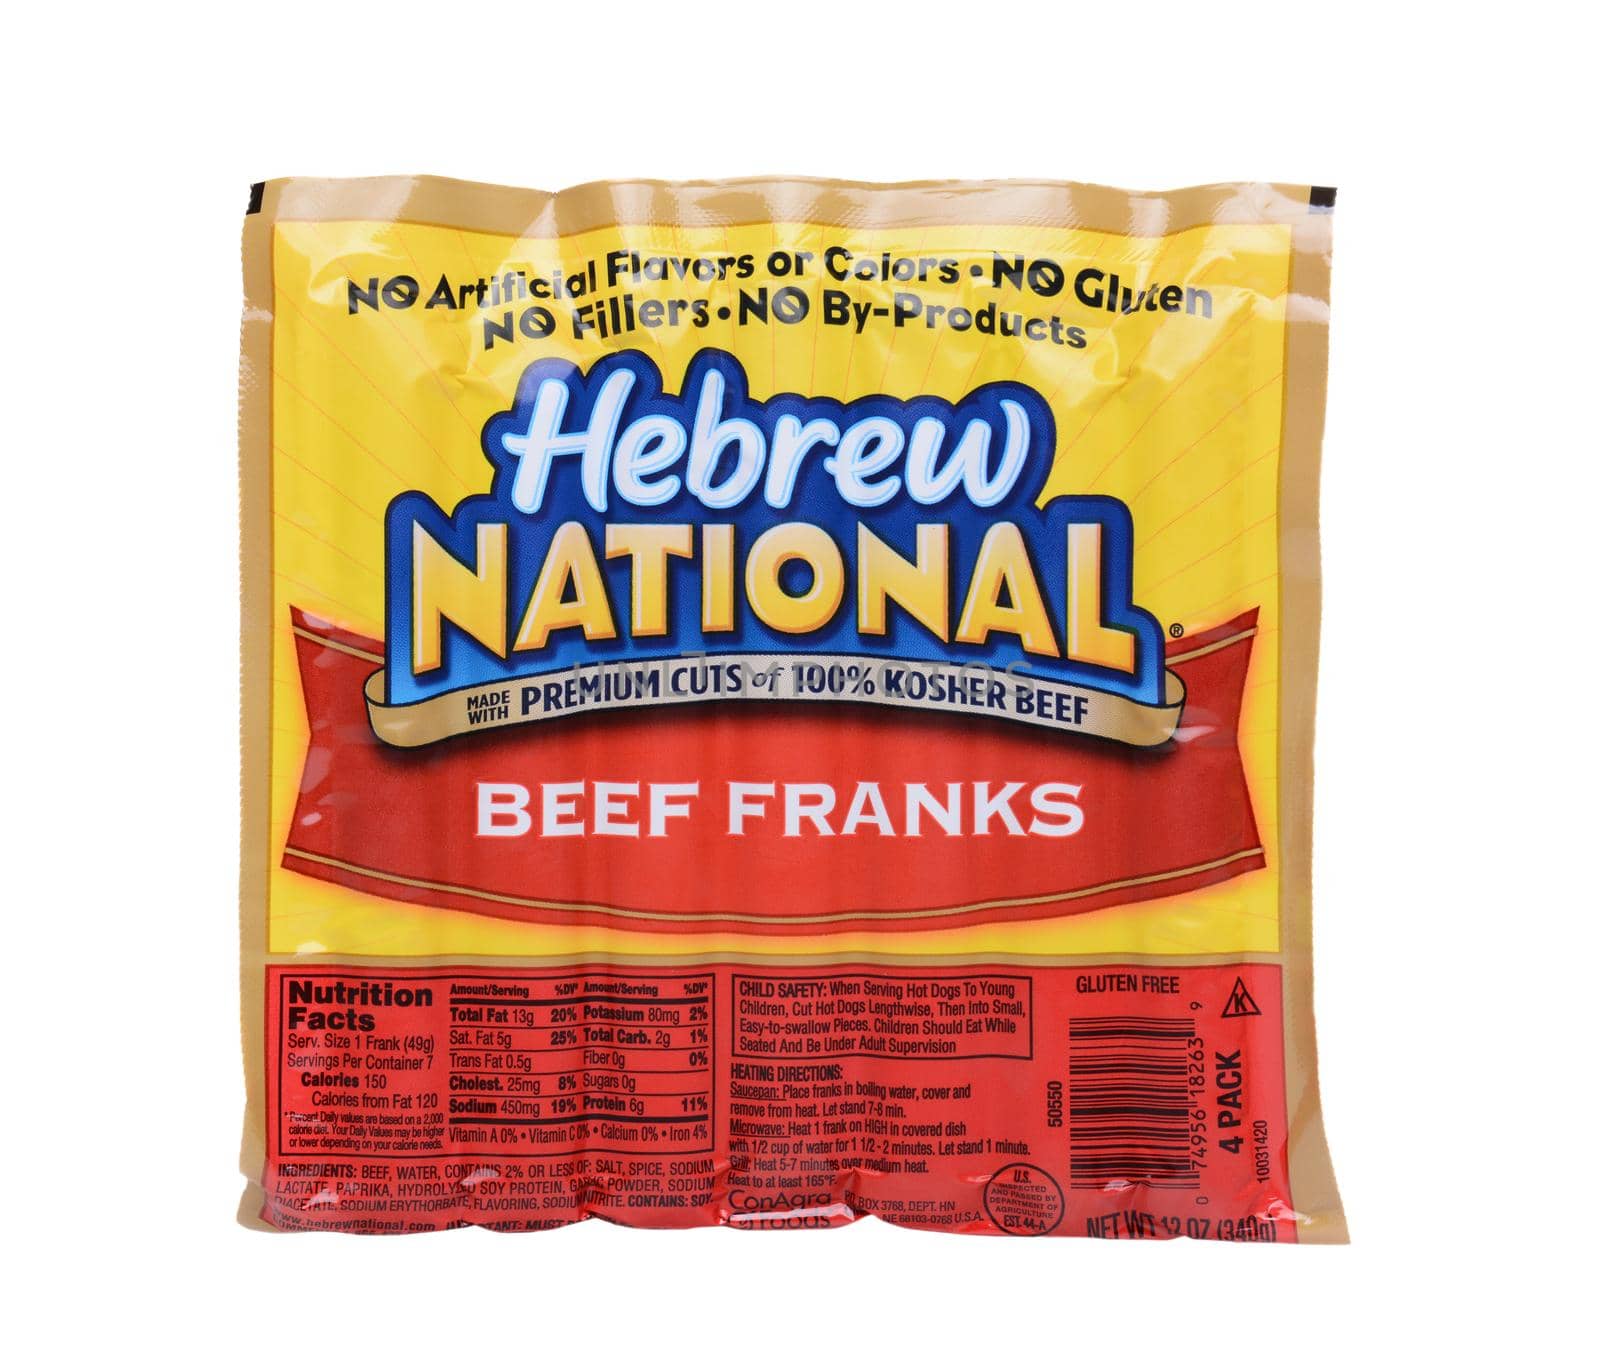 IRVINE, CA - May 19, 2014: A 12 ounce package of Hebrew National Beef Franks. The company founded on the Lower East Side of Manhattan in 1905, is now owned by ConAgra Foods.